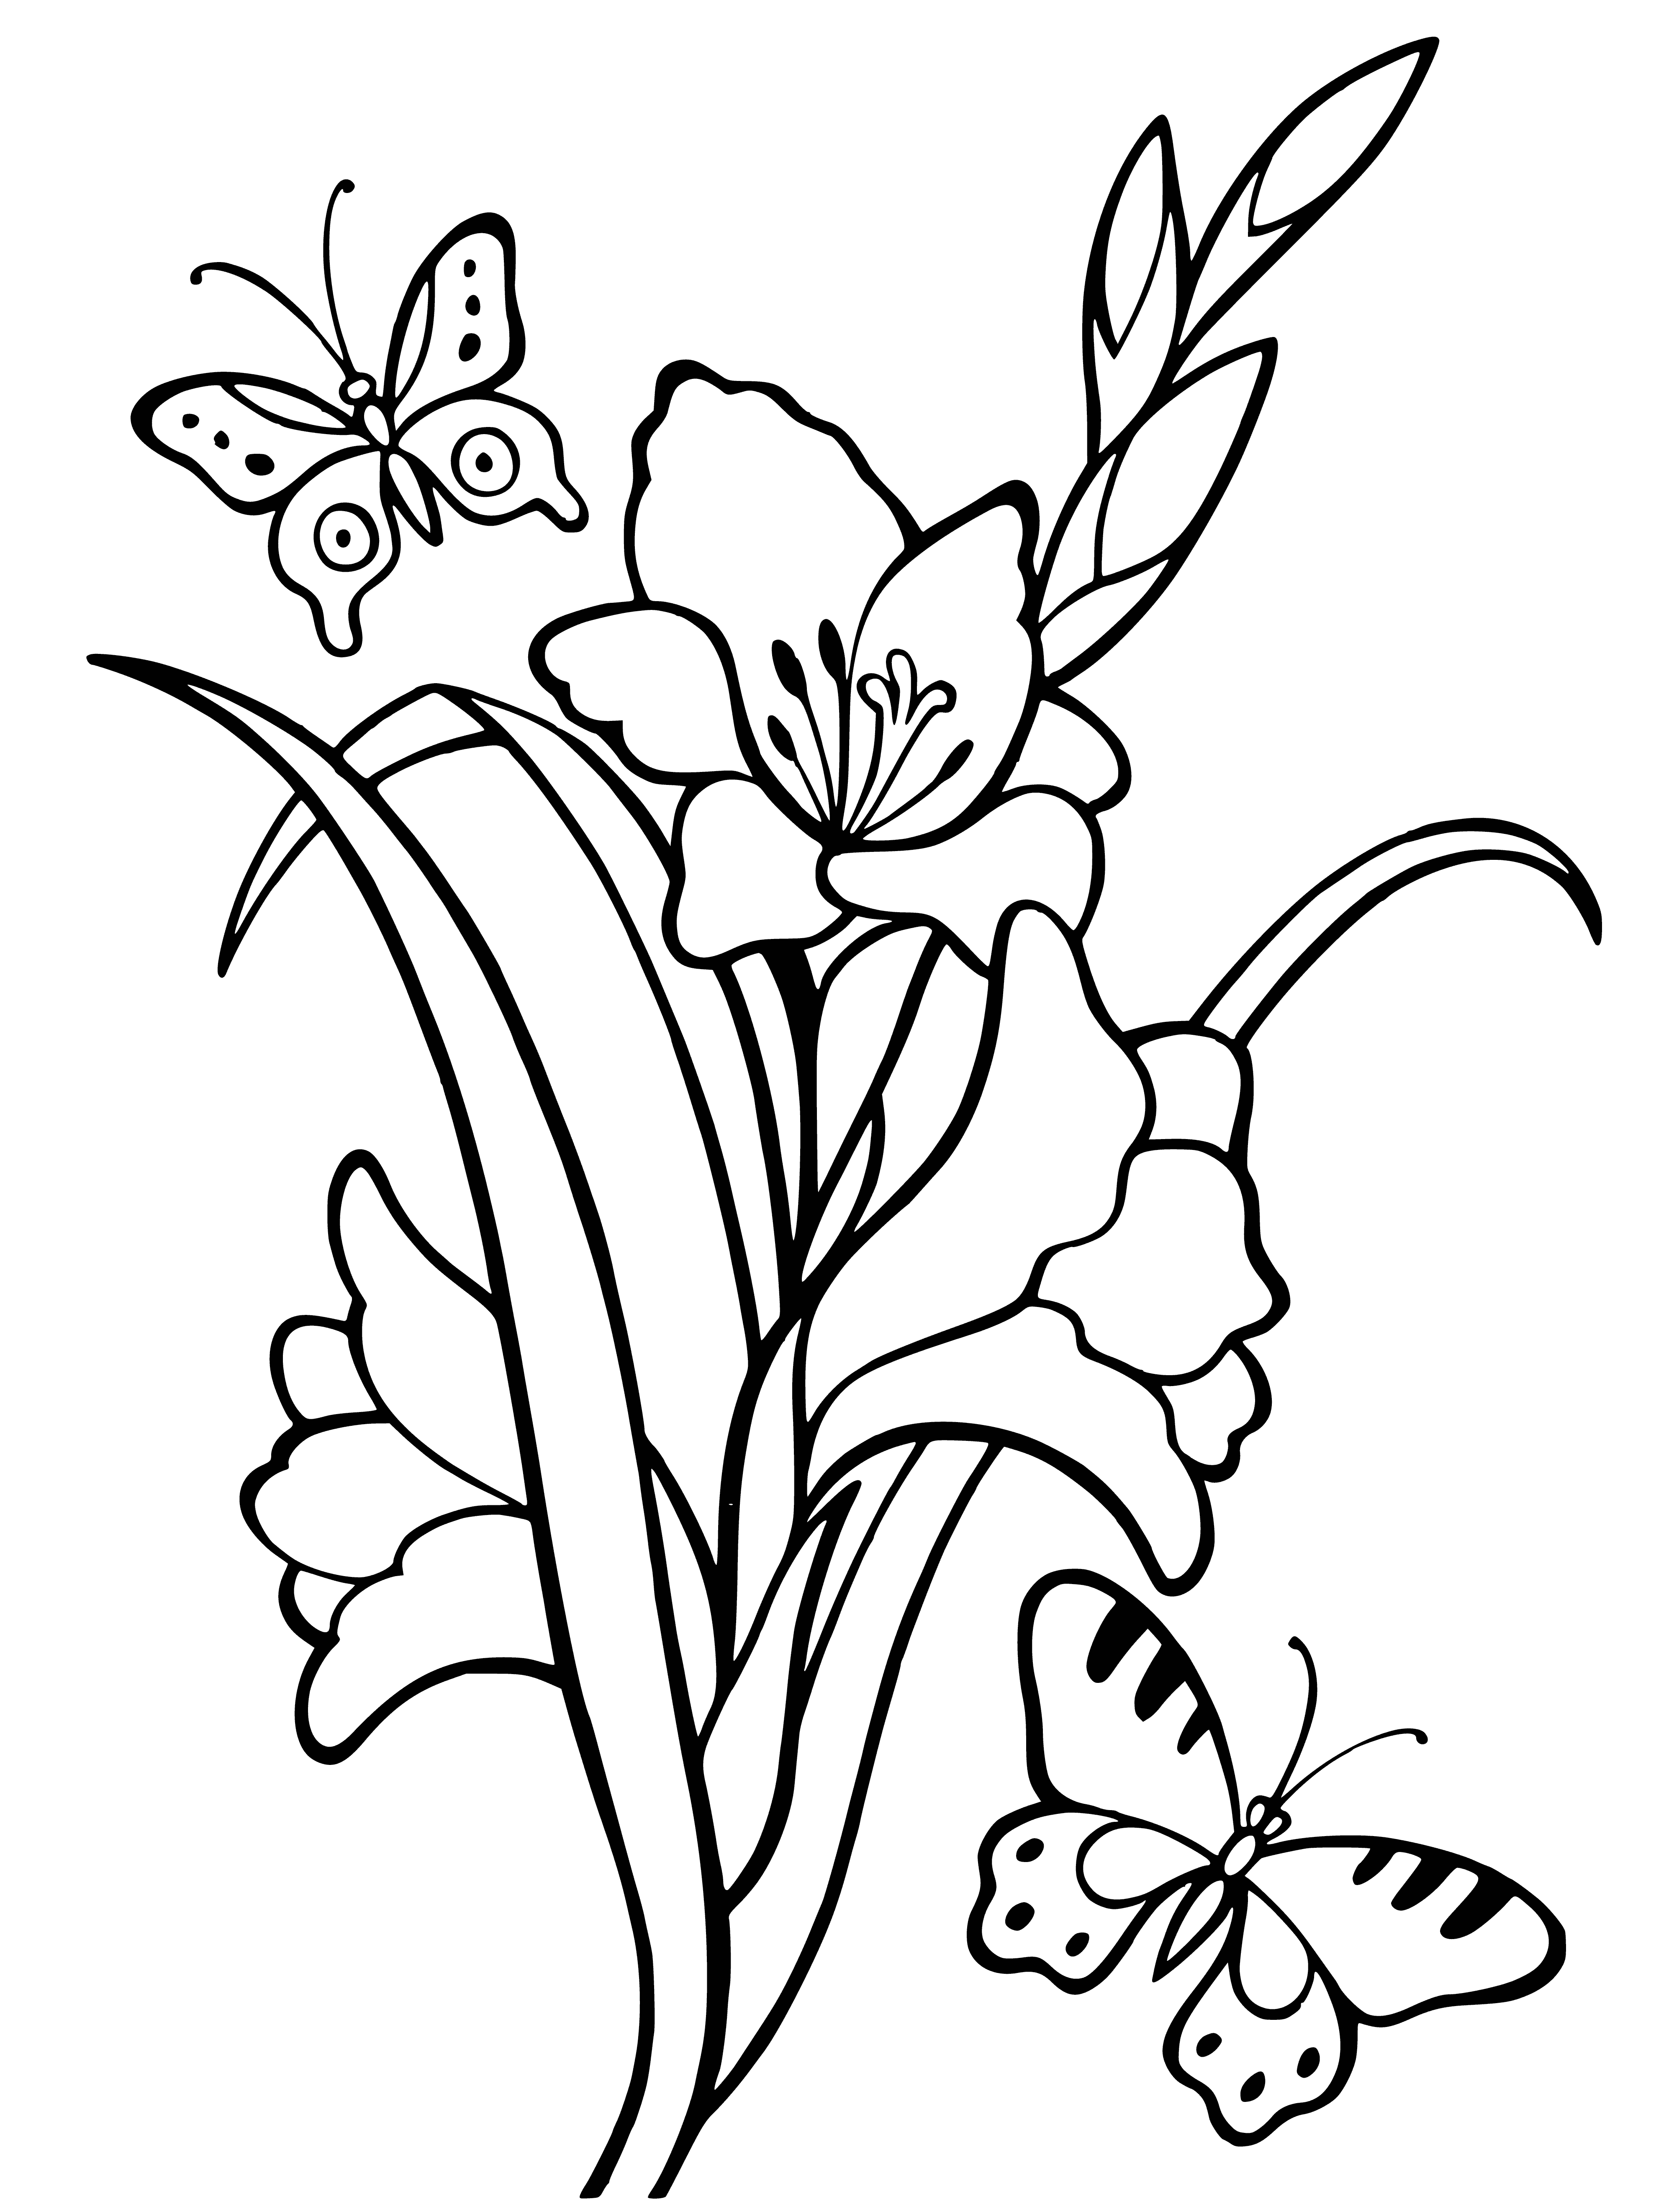 coloring page: Vibrant purple flowers with white centers and 6 light green leaves are atop a thick, green stem.